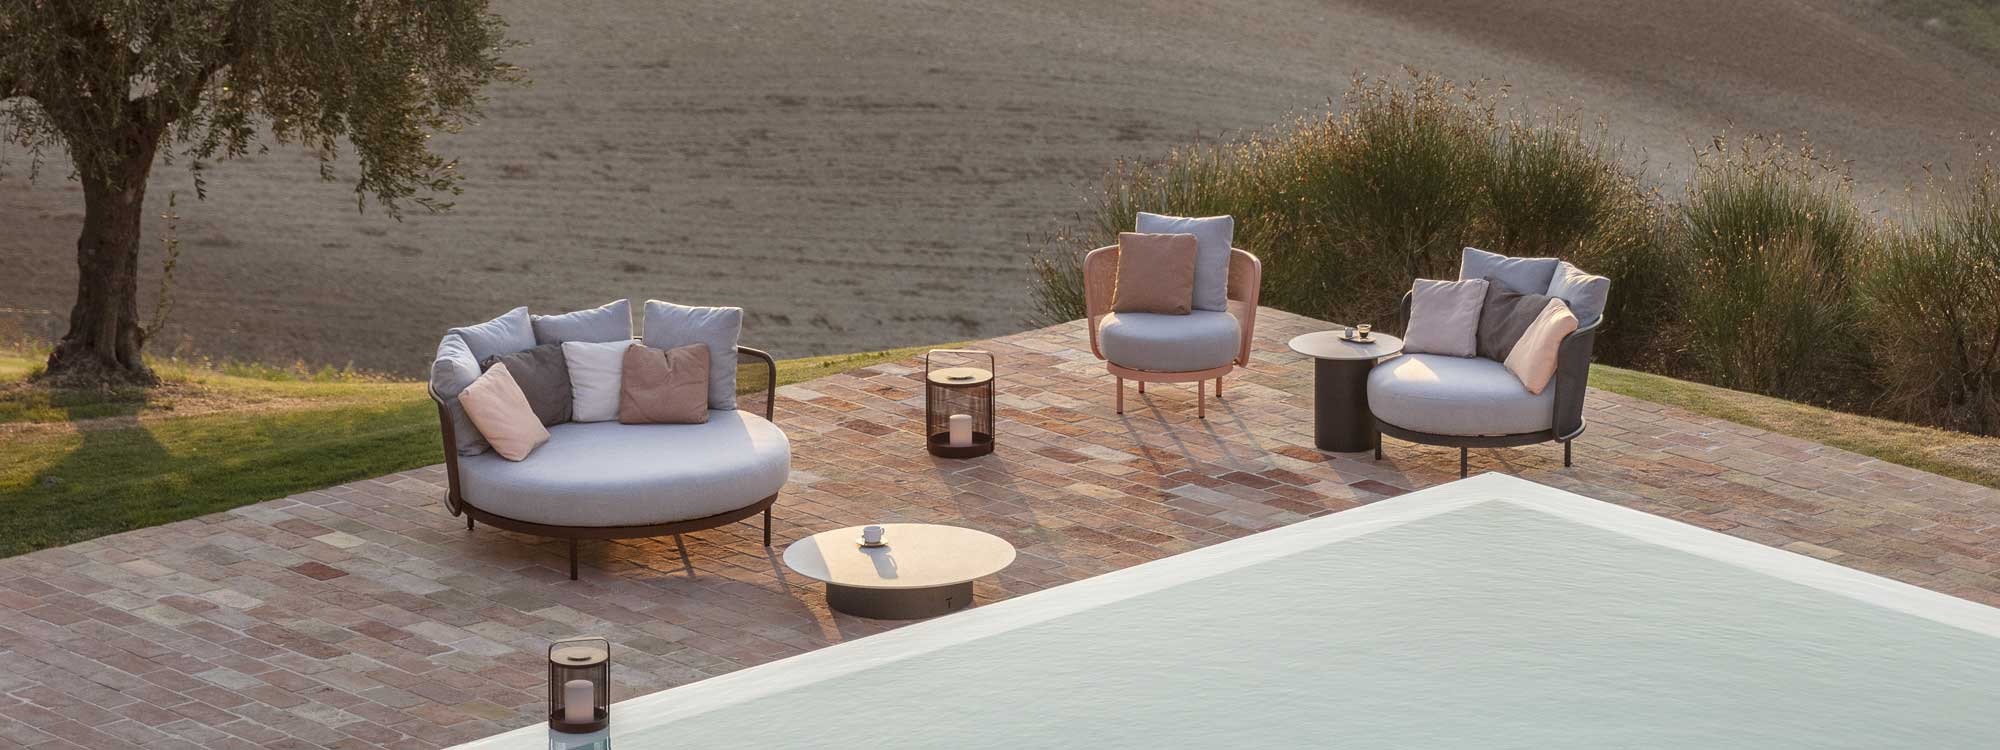 Image of Todus Baza modern garden lounge furniture on poolside together with Branta low tables, with warm light of early evening